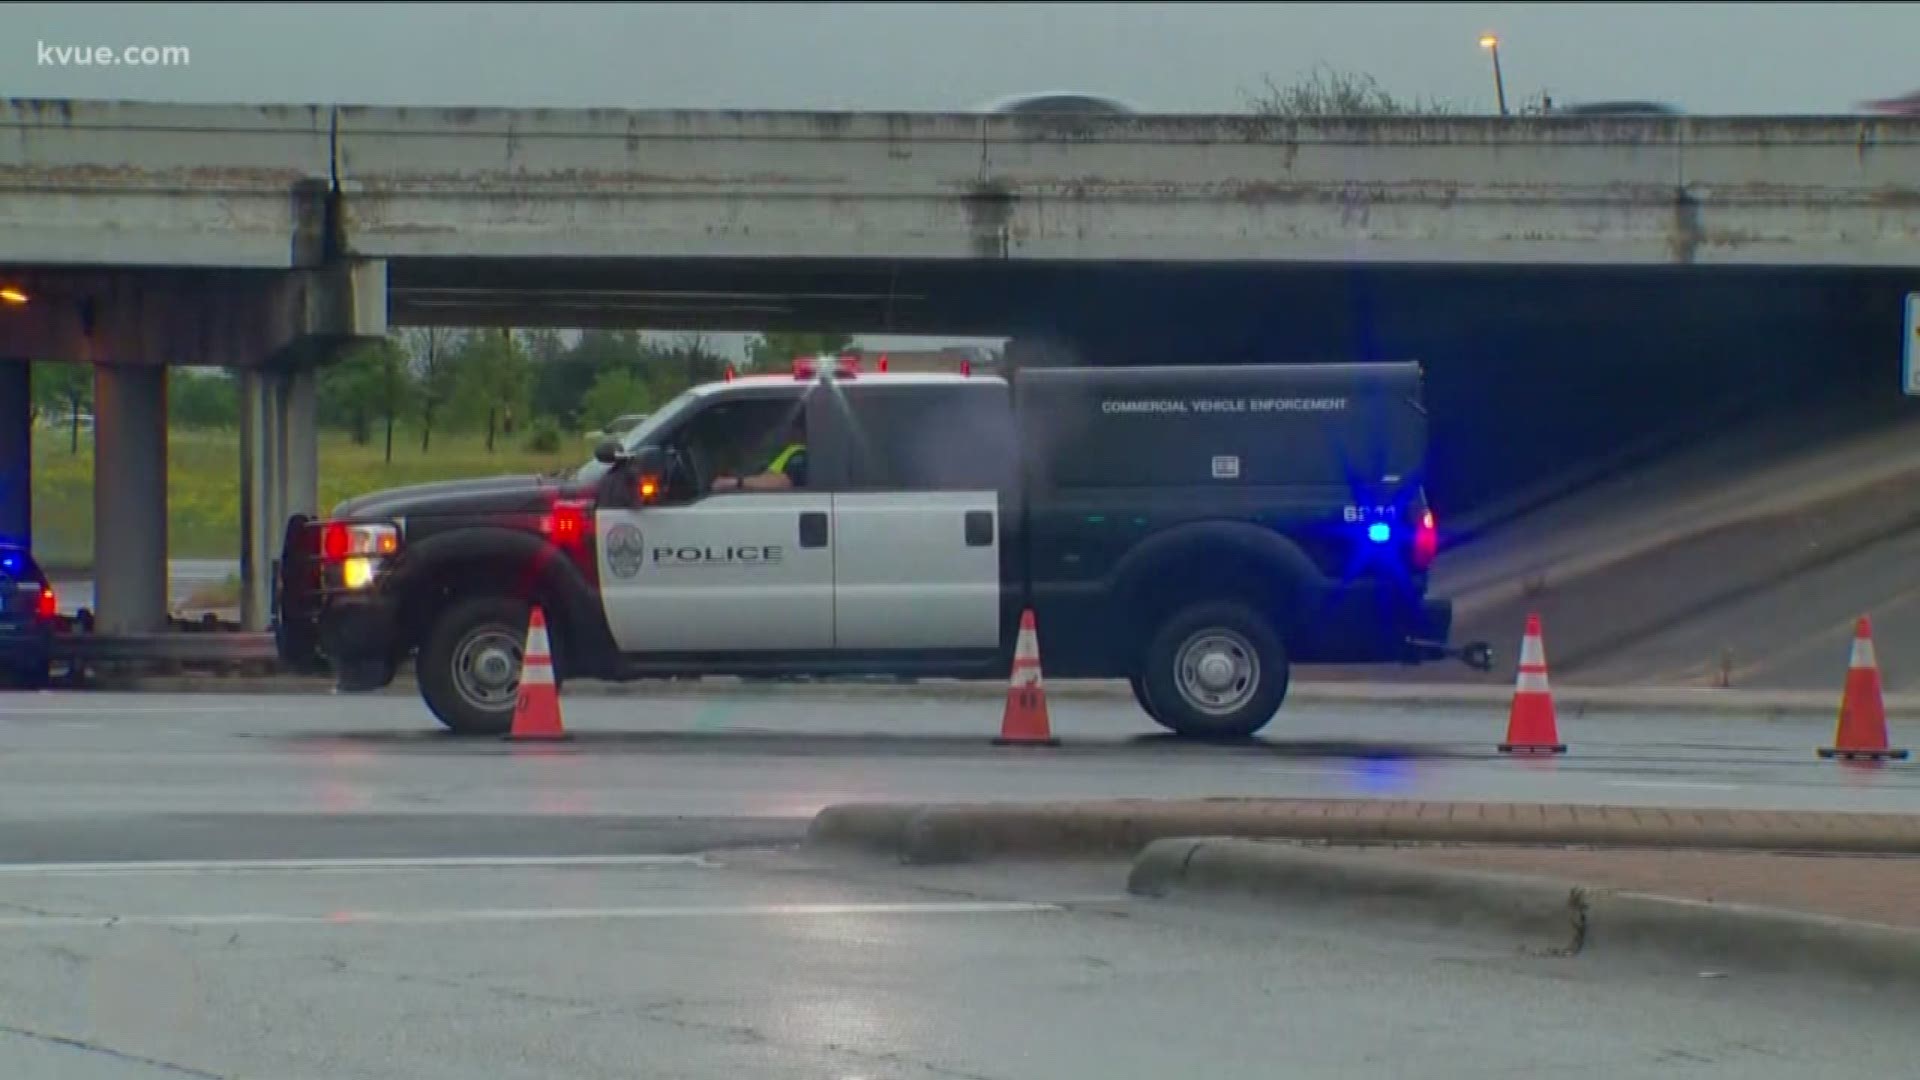 Austin police are looking for a driver who took off after hitting a person in North Austin. It happened just before 6 this morning at Wells Branch Parkway near FM 18-25.